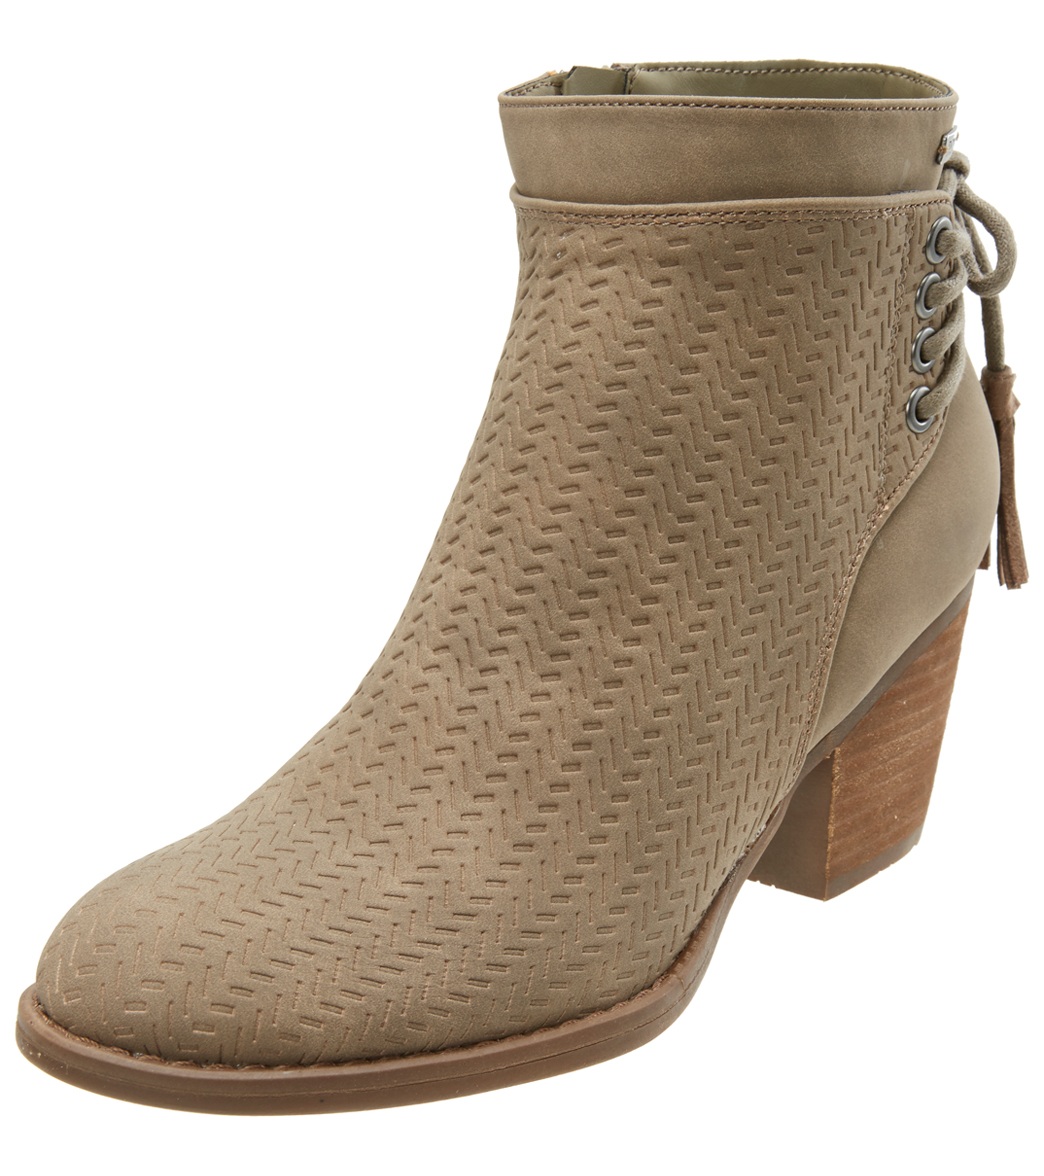 Roxy Women's Devon Ankle Boot at SwimOutlet.com - Free Shipping